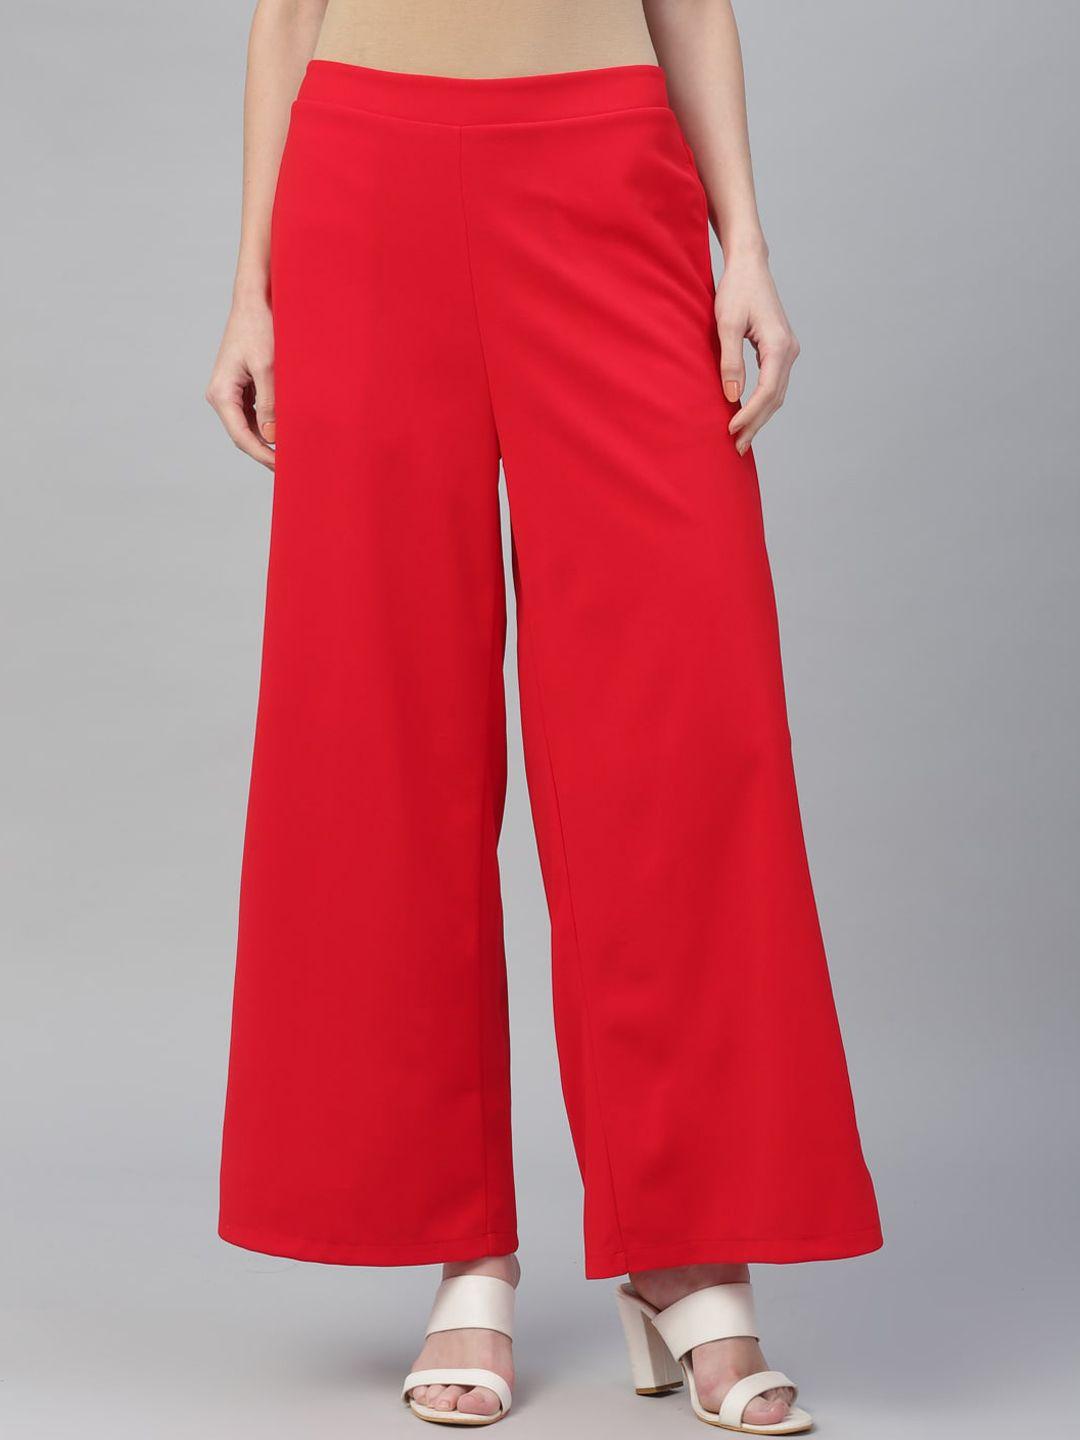 athena-women-red-smart-flared-solid-parallel-trousers